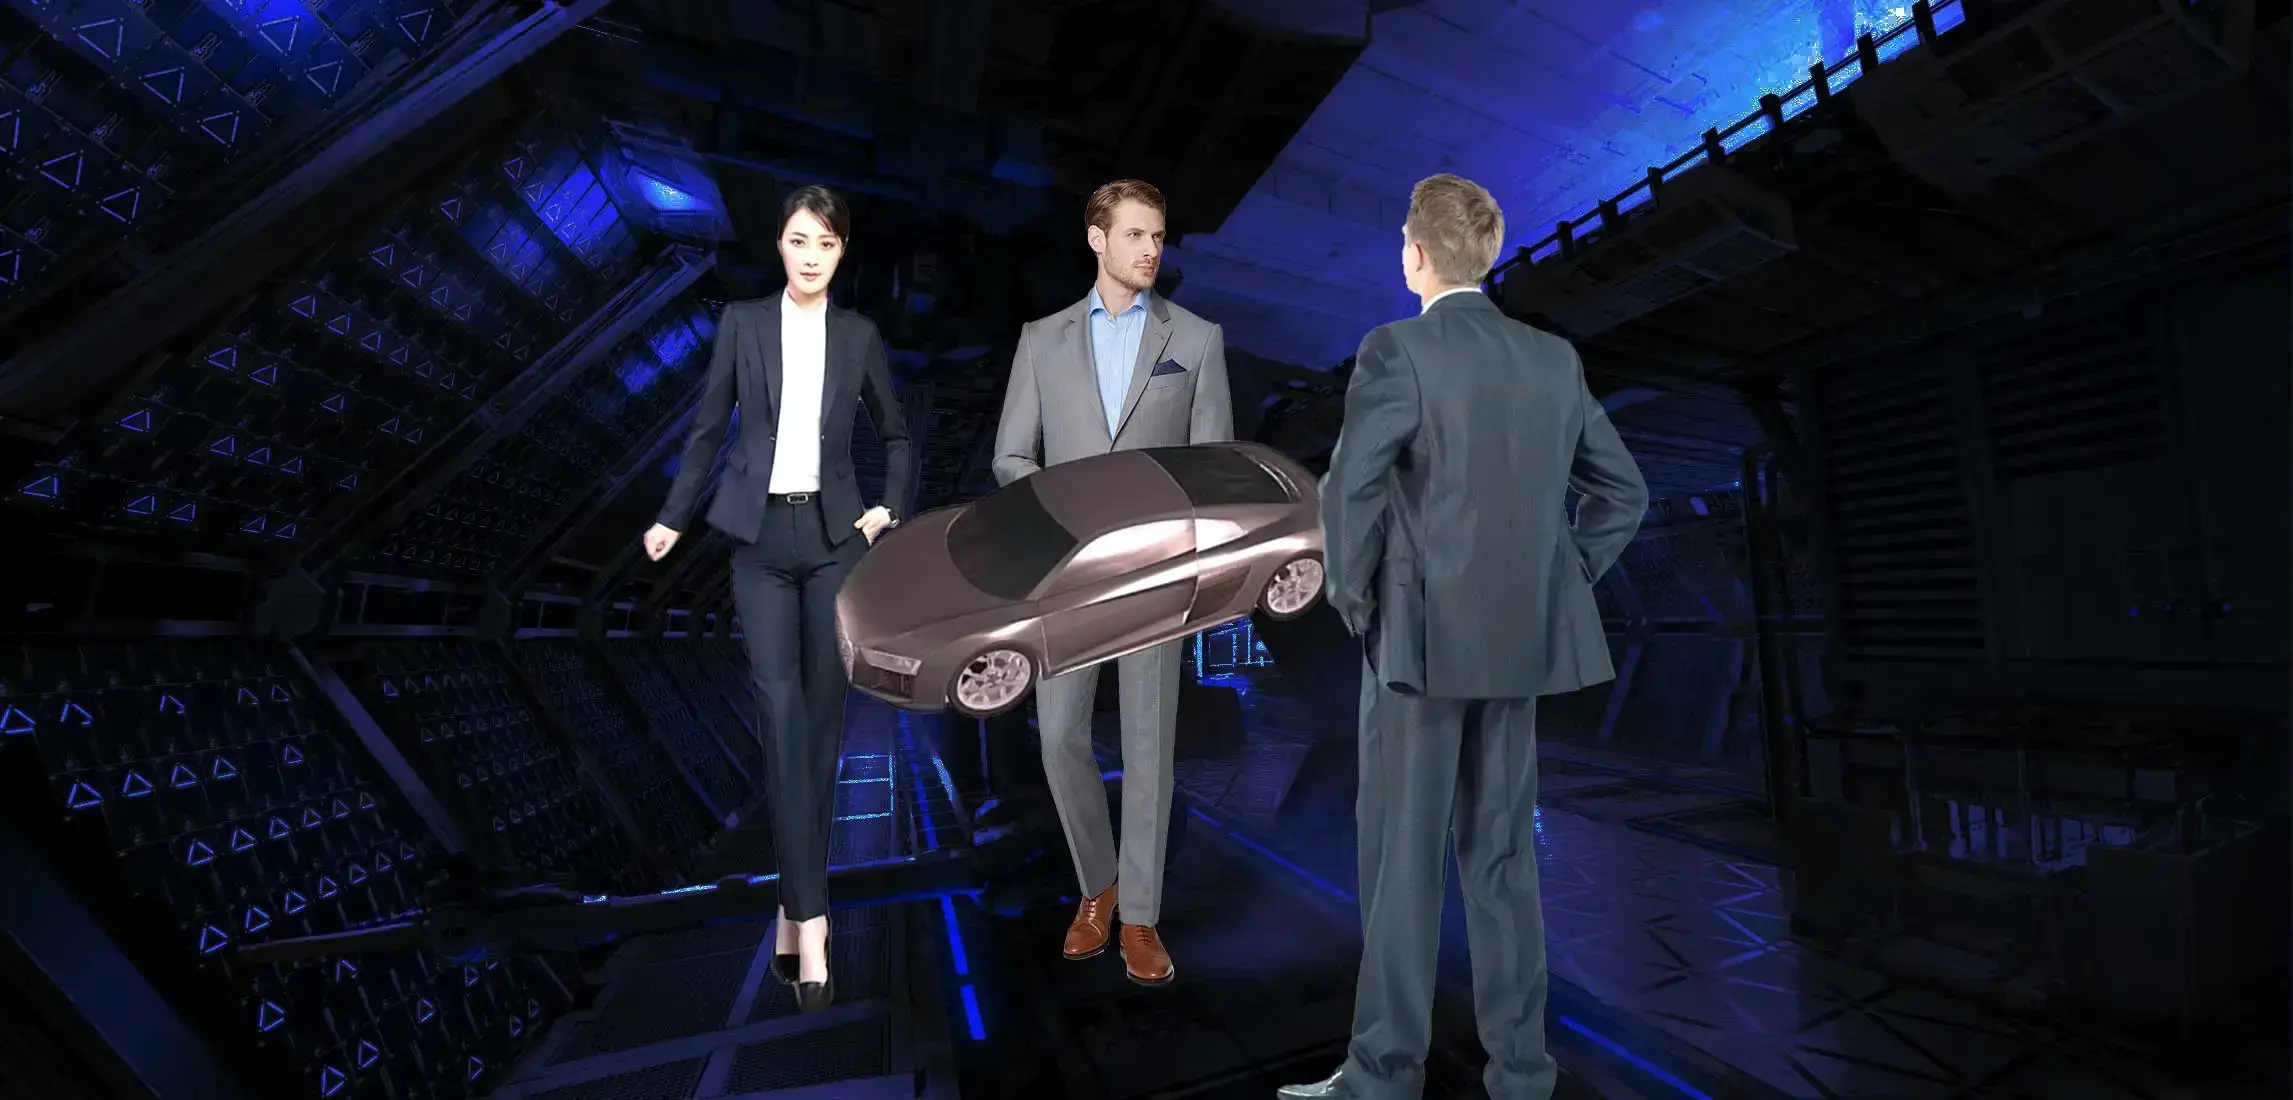 A Hologram of a car surrounded by 3 people in a digital world